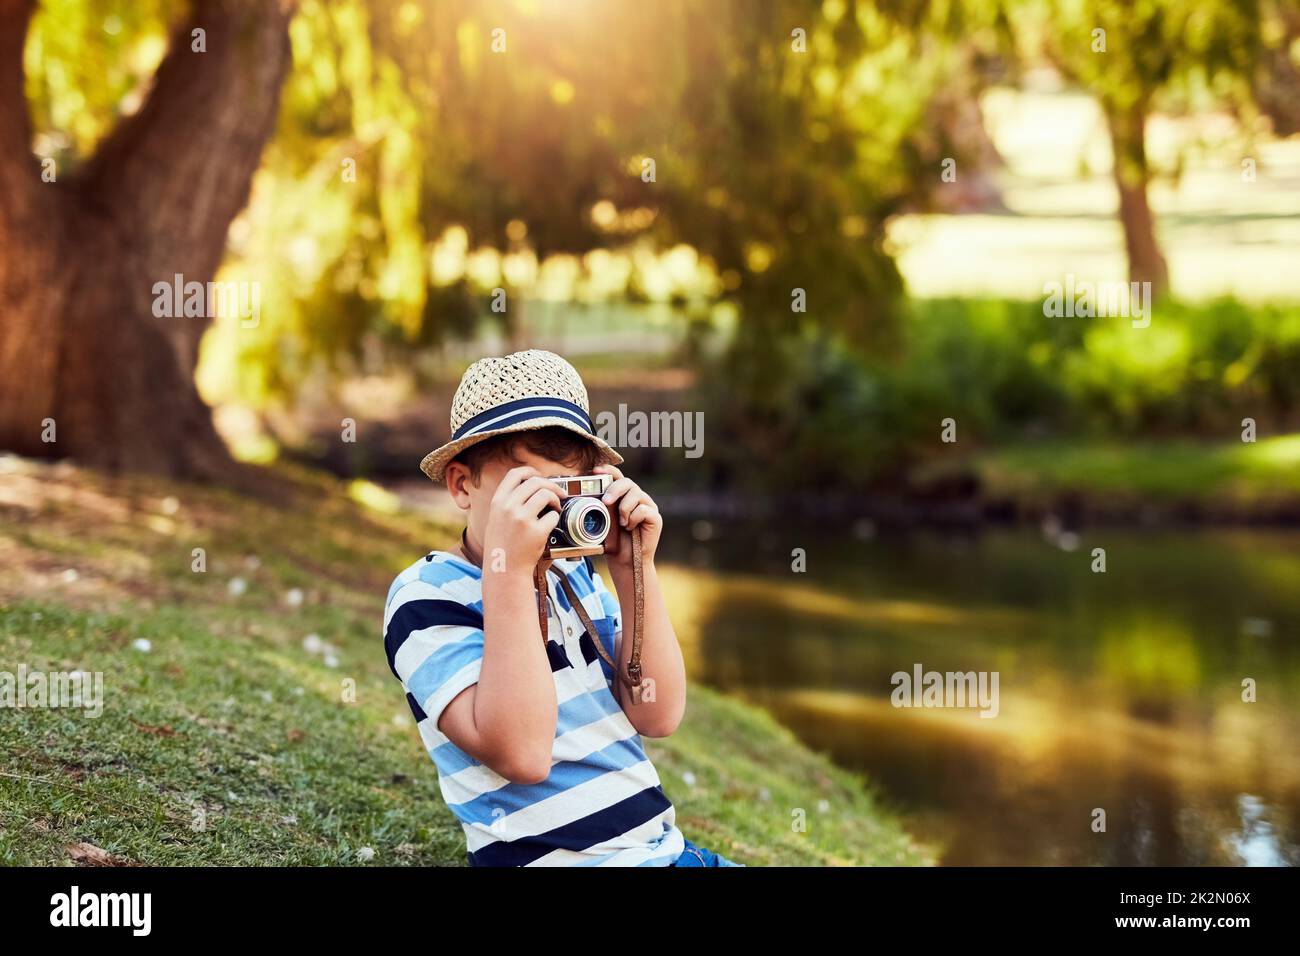 Taking some scenic shots at the park. Shot of a little boy taking a photo with a vintage camera at the park. Stock Photo